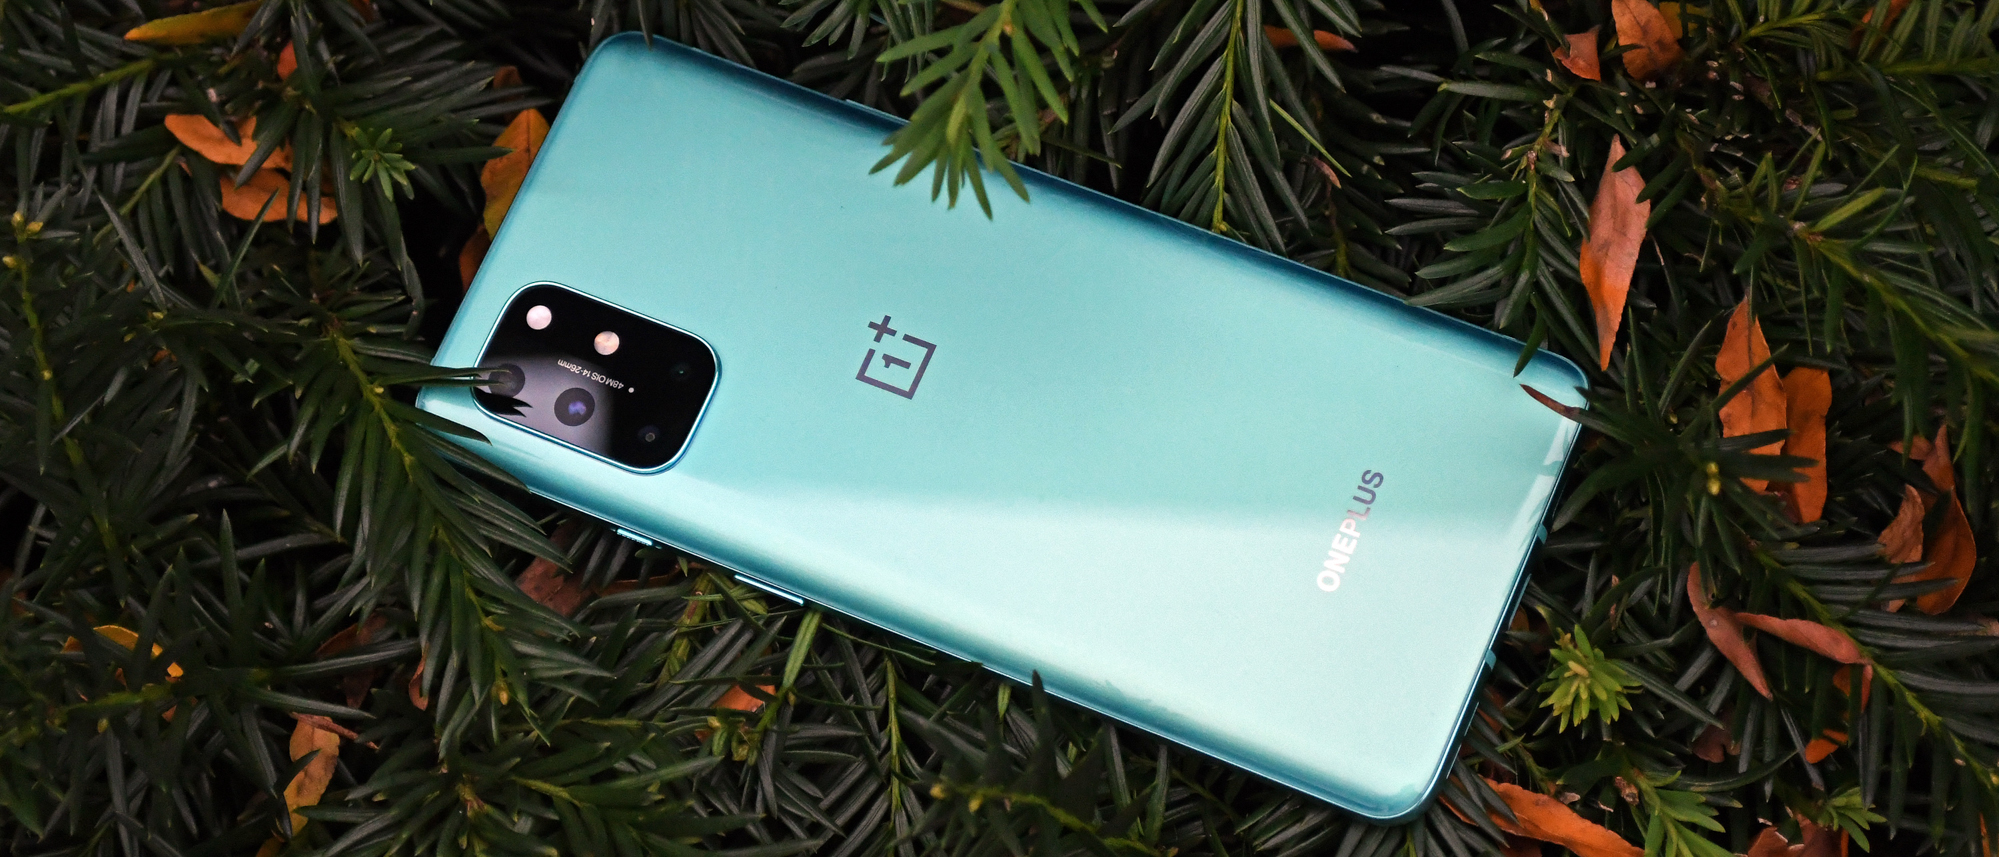 OnePlus 8T review: Is this the best of both worlds?